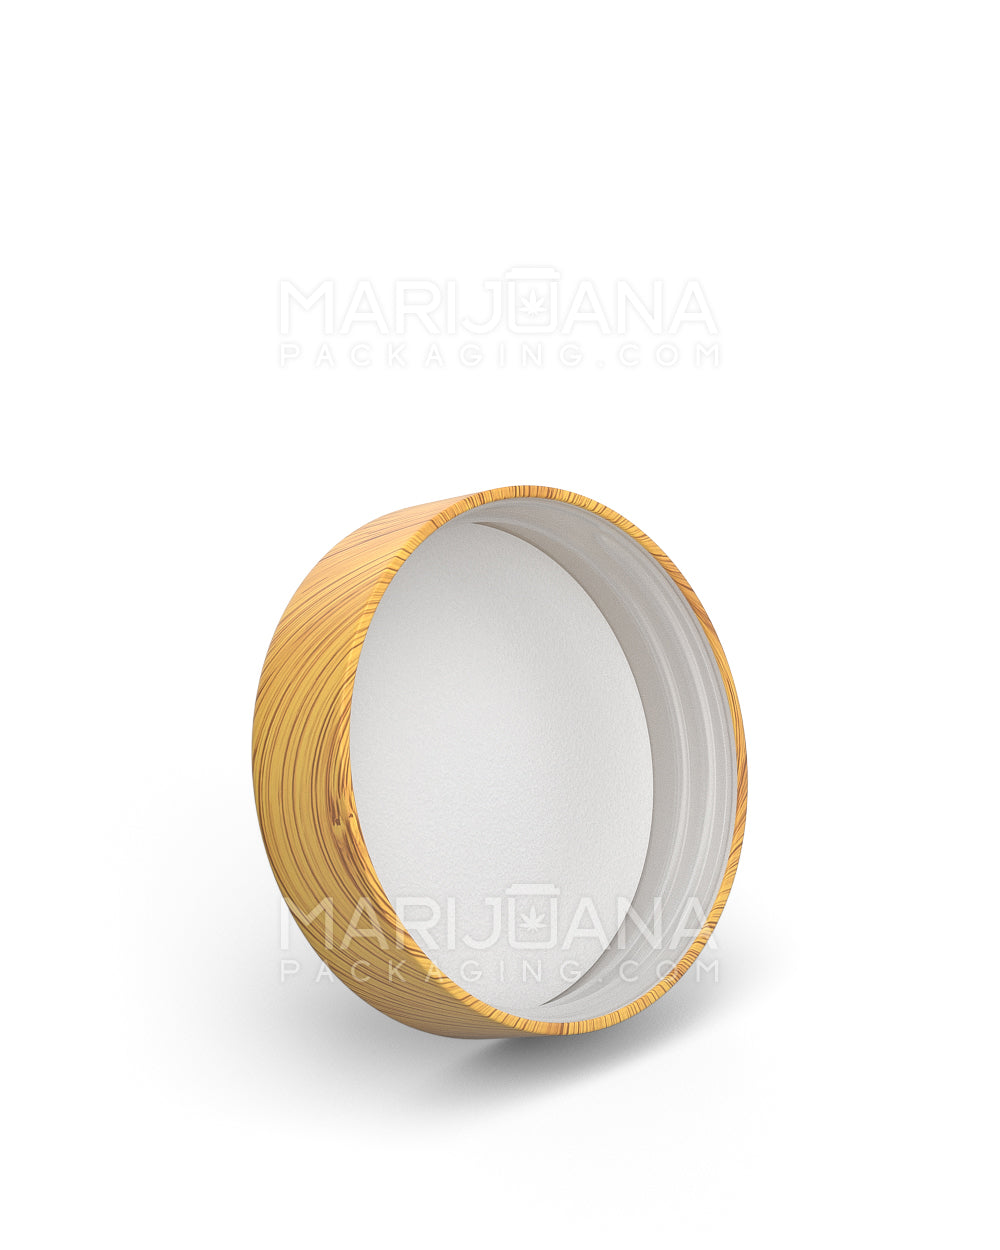 Child Resistant | Smooth Flat Push Down & Turn Plastic Caps w/ Foam Liner | 53mm - Bamboo Wood - 100 Count